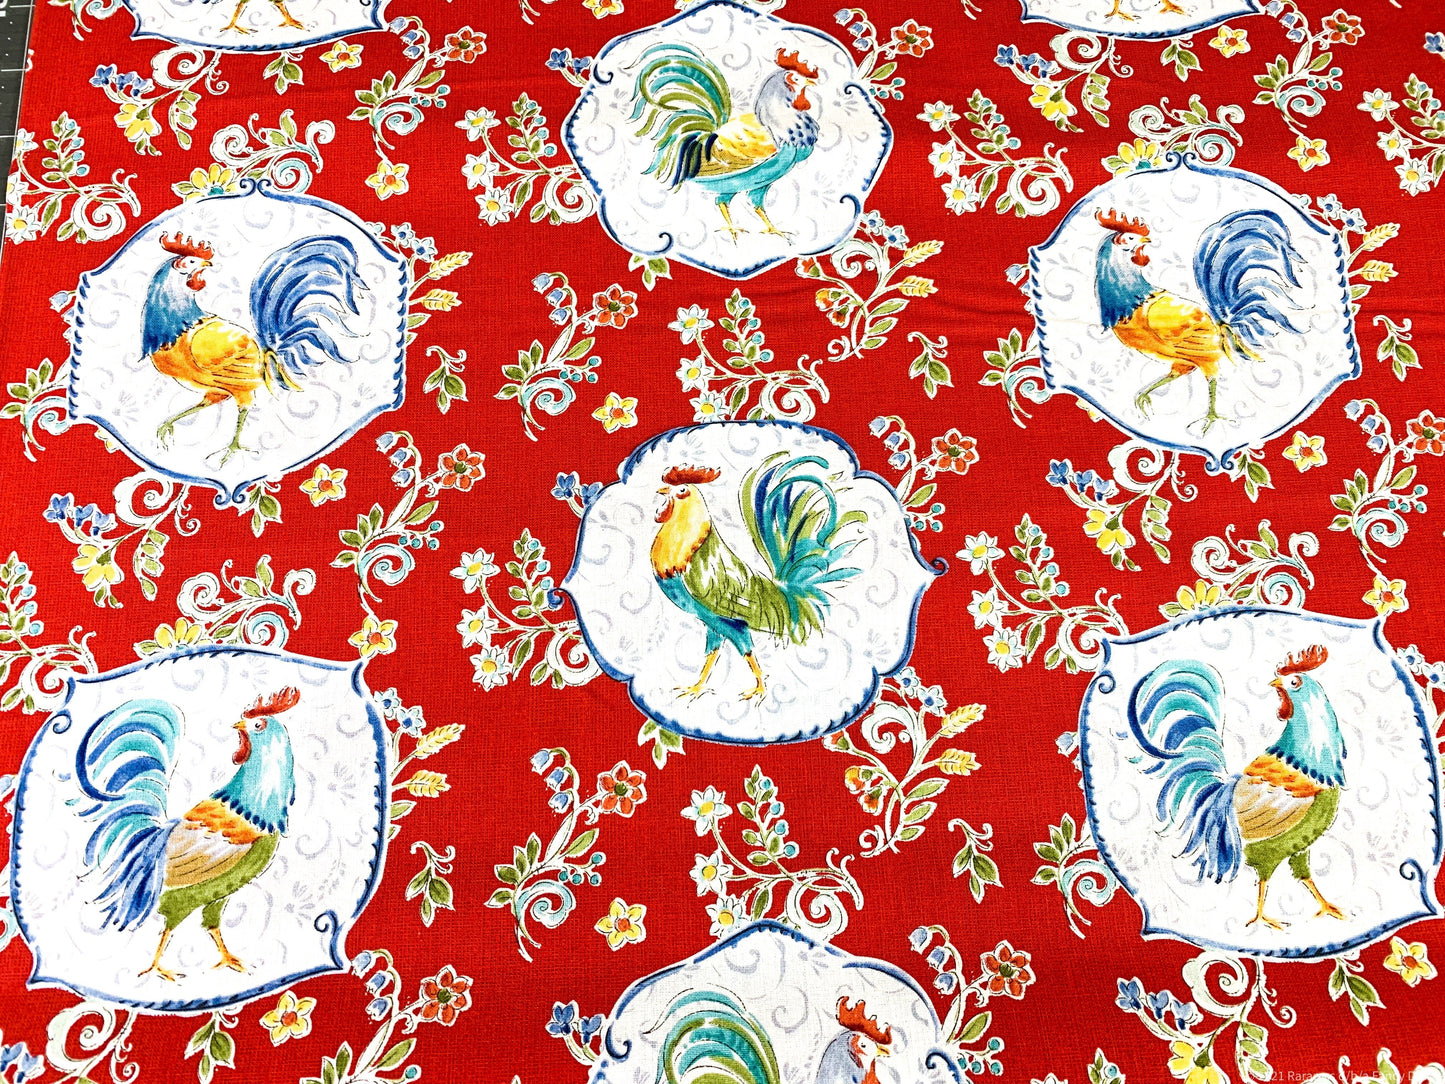 Red Morning Bloom Rooster fabric 5825 Chicken fabric